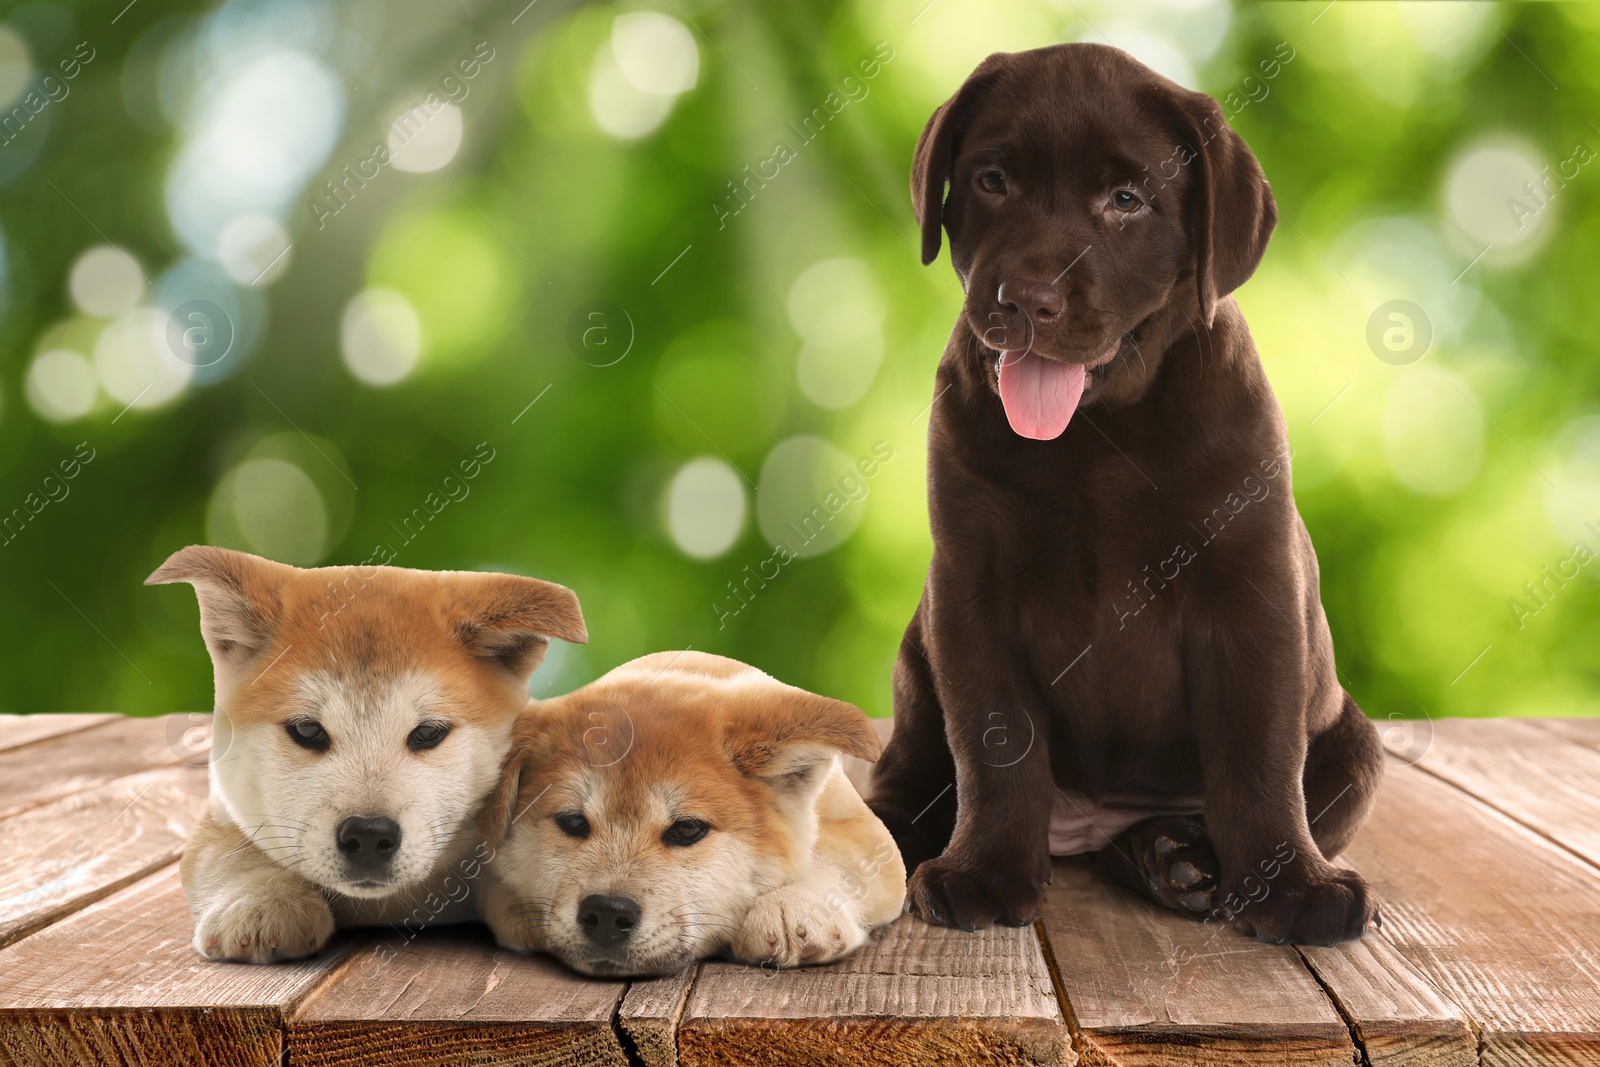 Image of Cute puppies on wooden surface outdoors, bokeh effect. Adorable pets